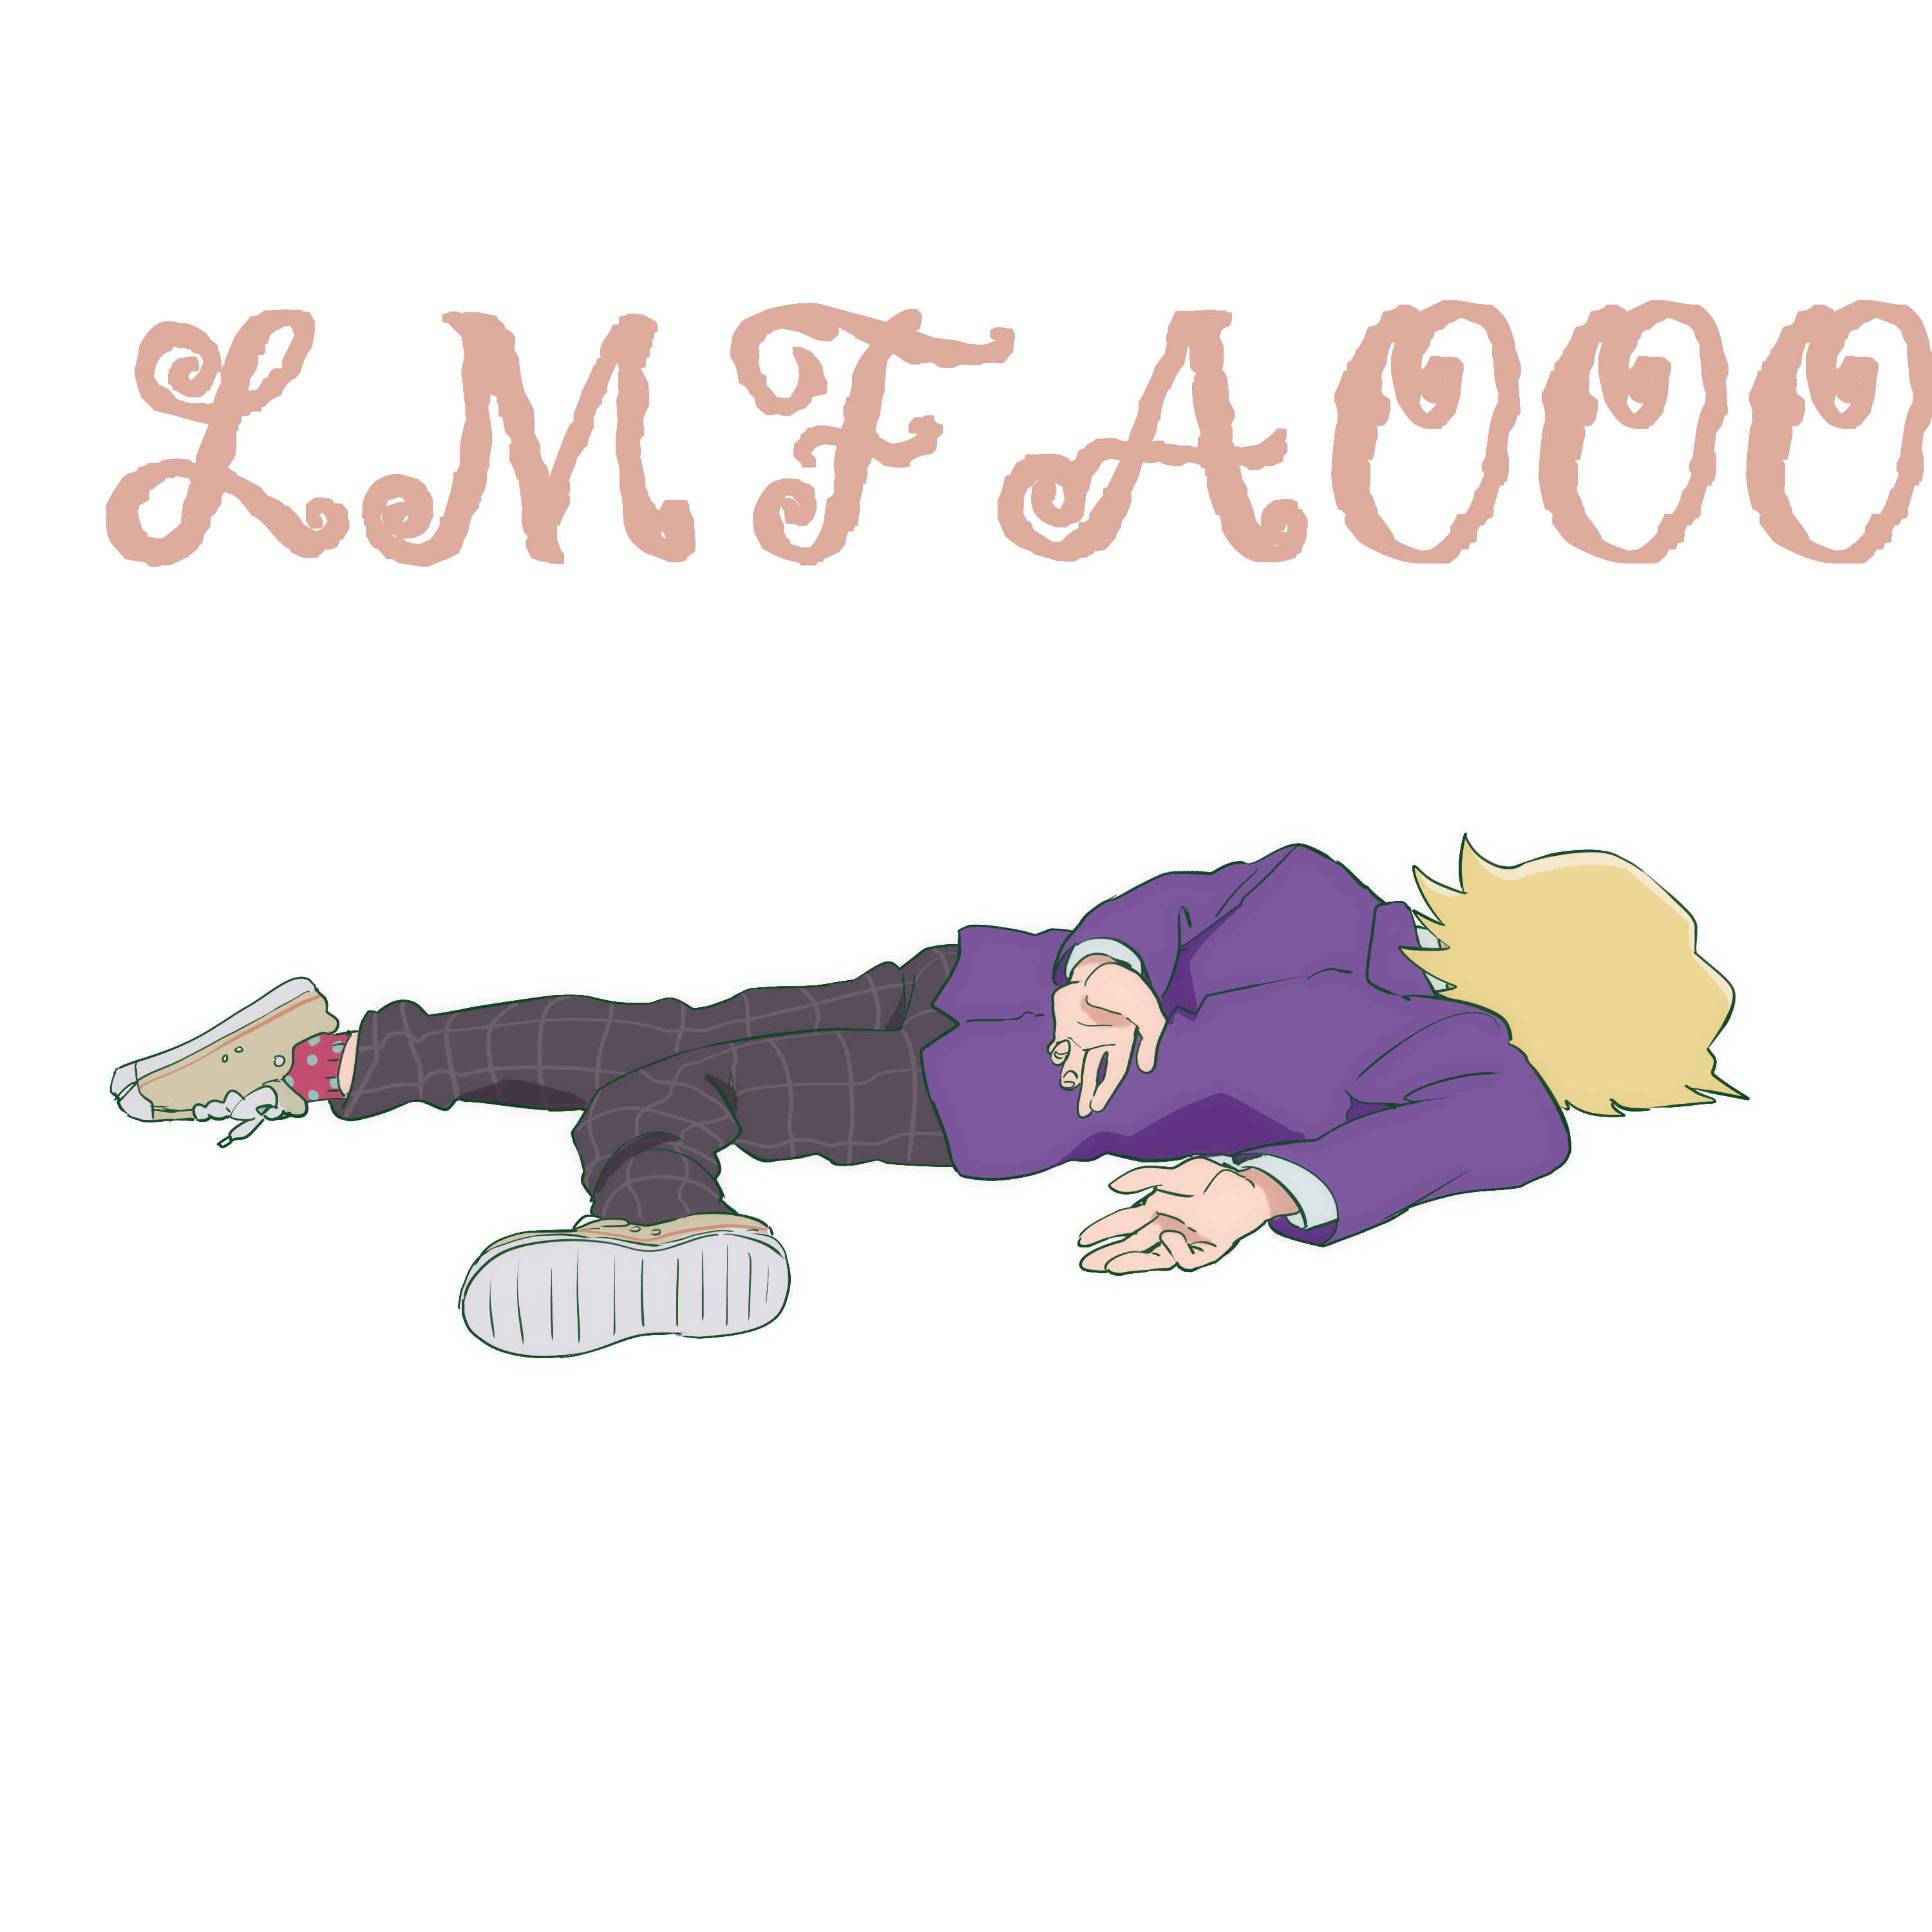 mob psycho 100 teru on the floor with LMFAOOO in fancy letters above him